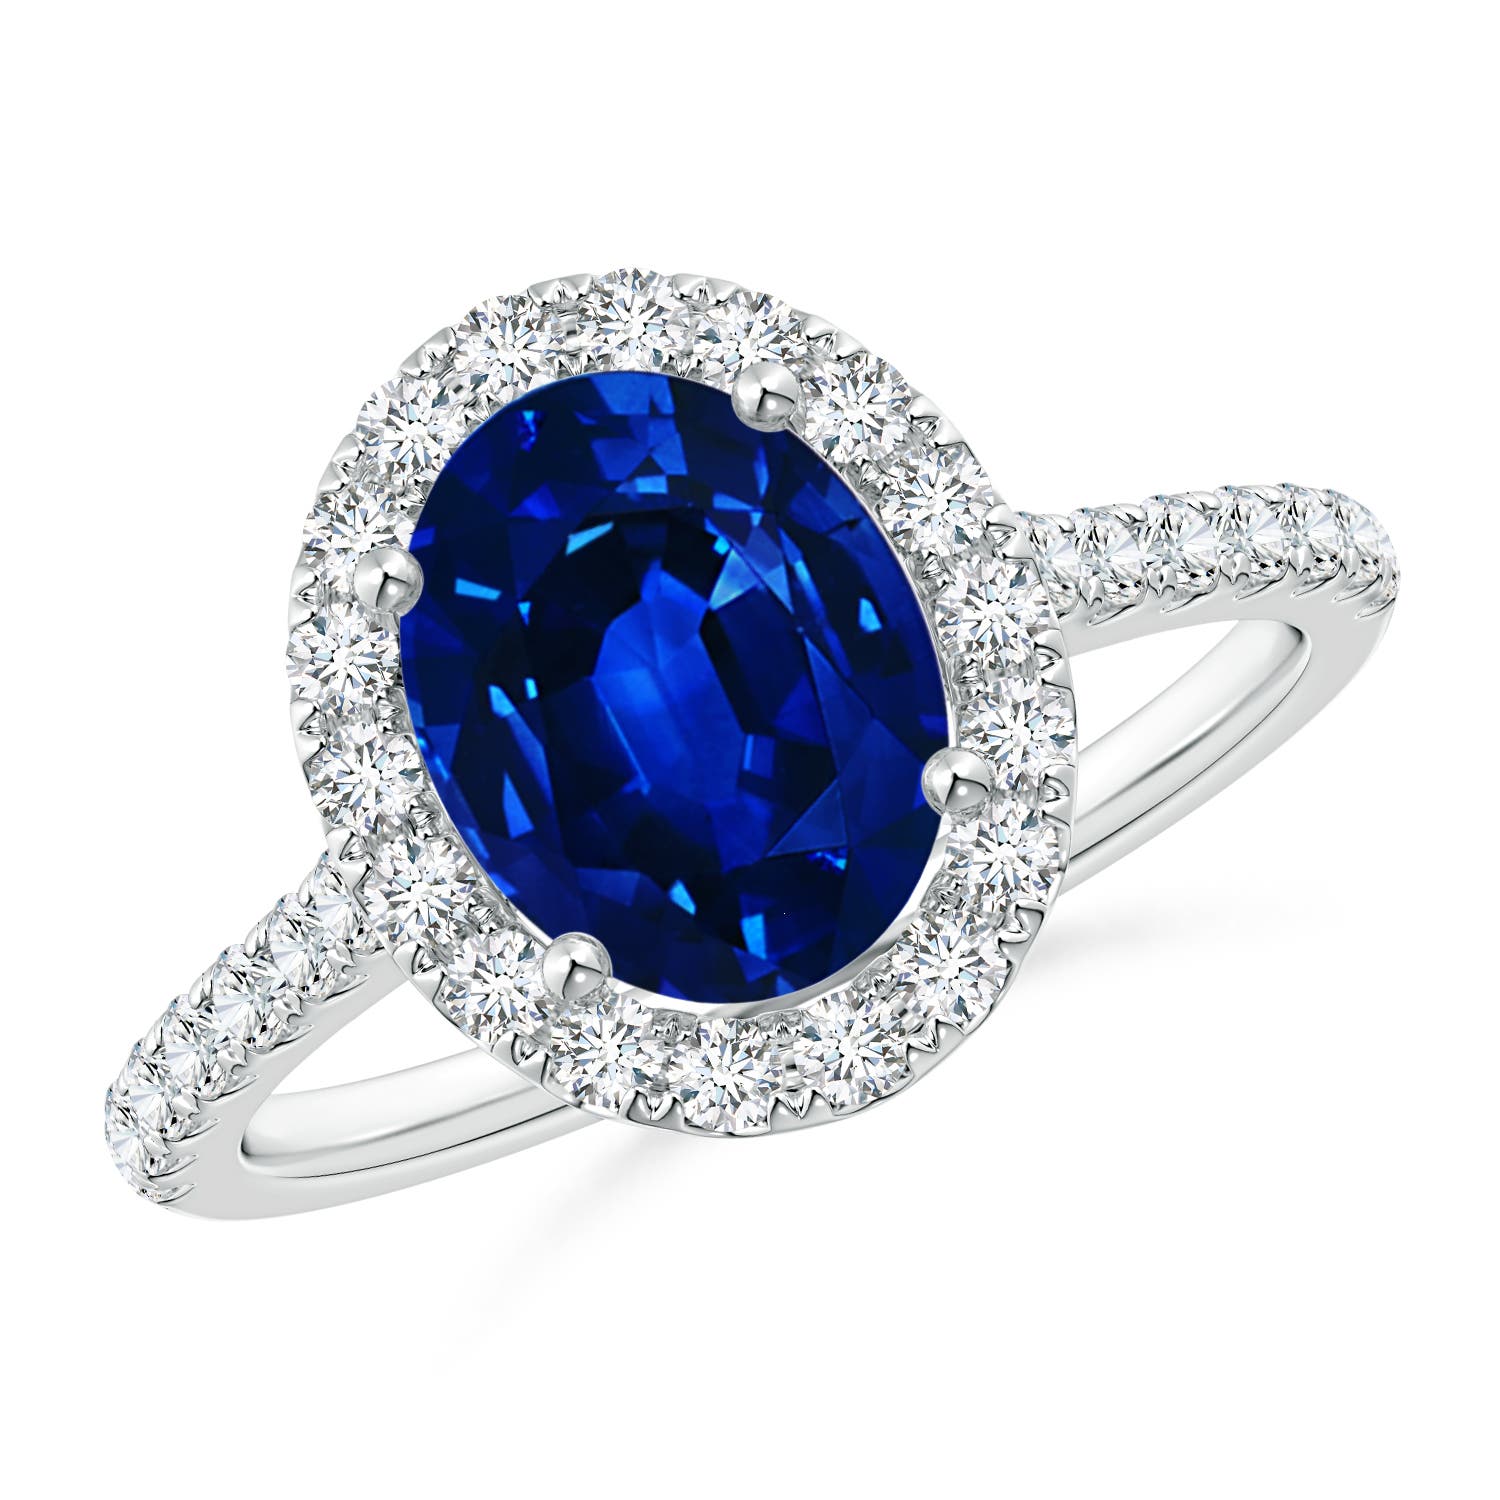 Oval Sapphire Halo Ring with Diamond Accents